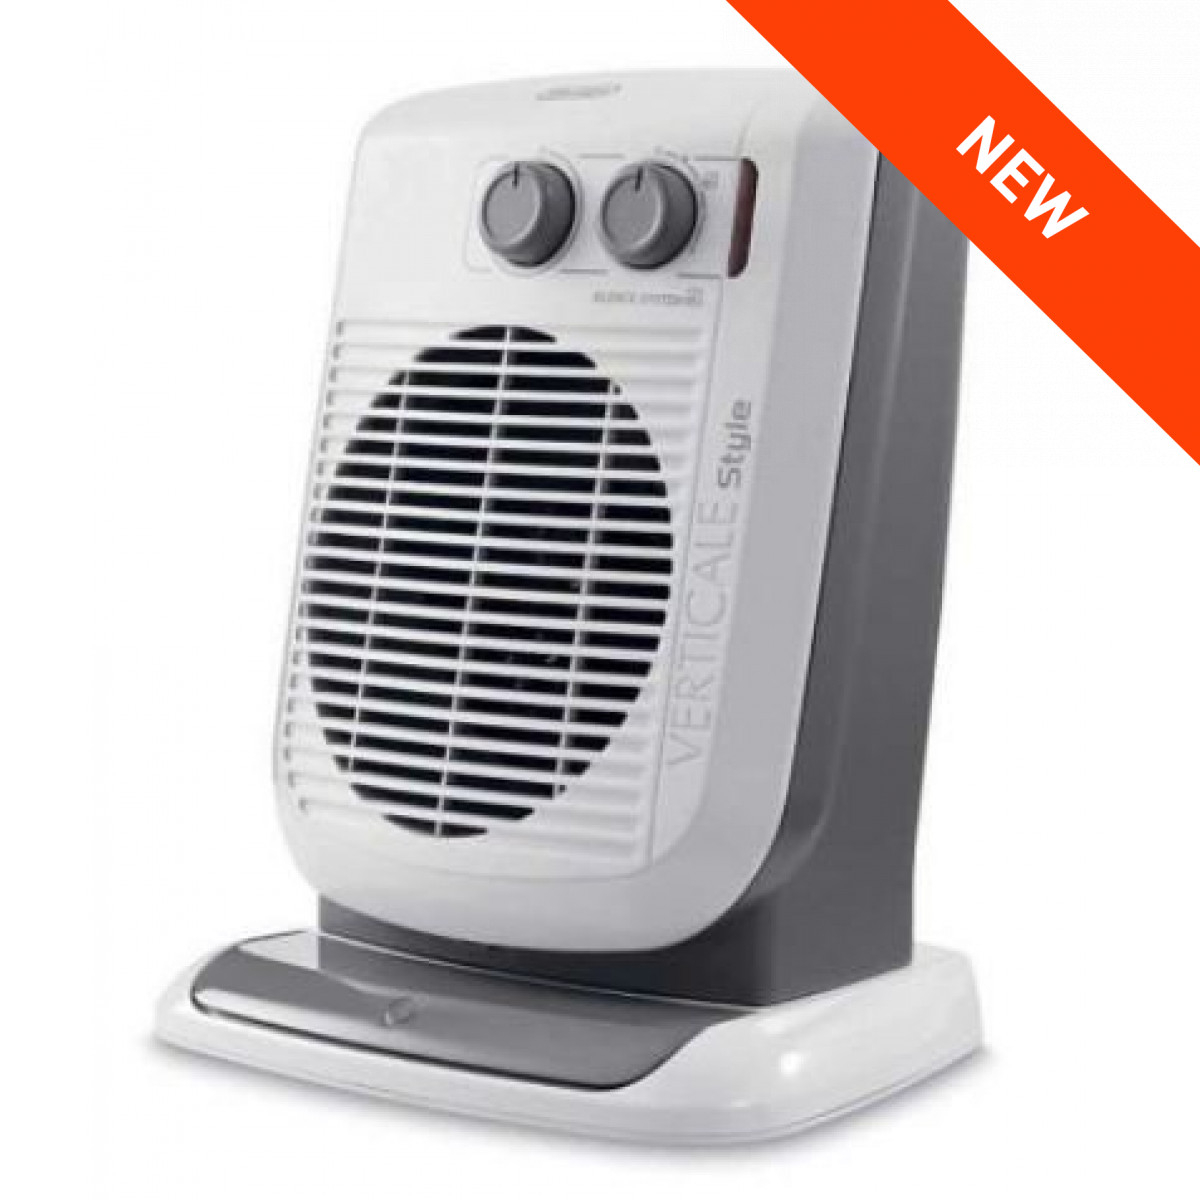 Delonghi Hvf3533b New Vertical Fan Heater With Oscillating Base 3000w White with regard to measurements 1200 X 1200